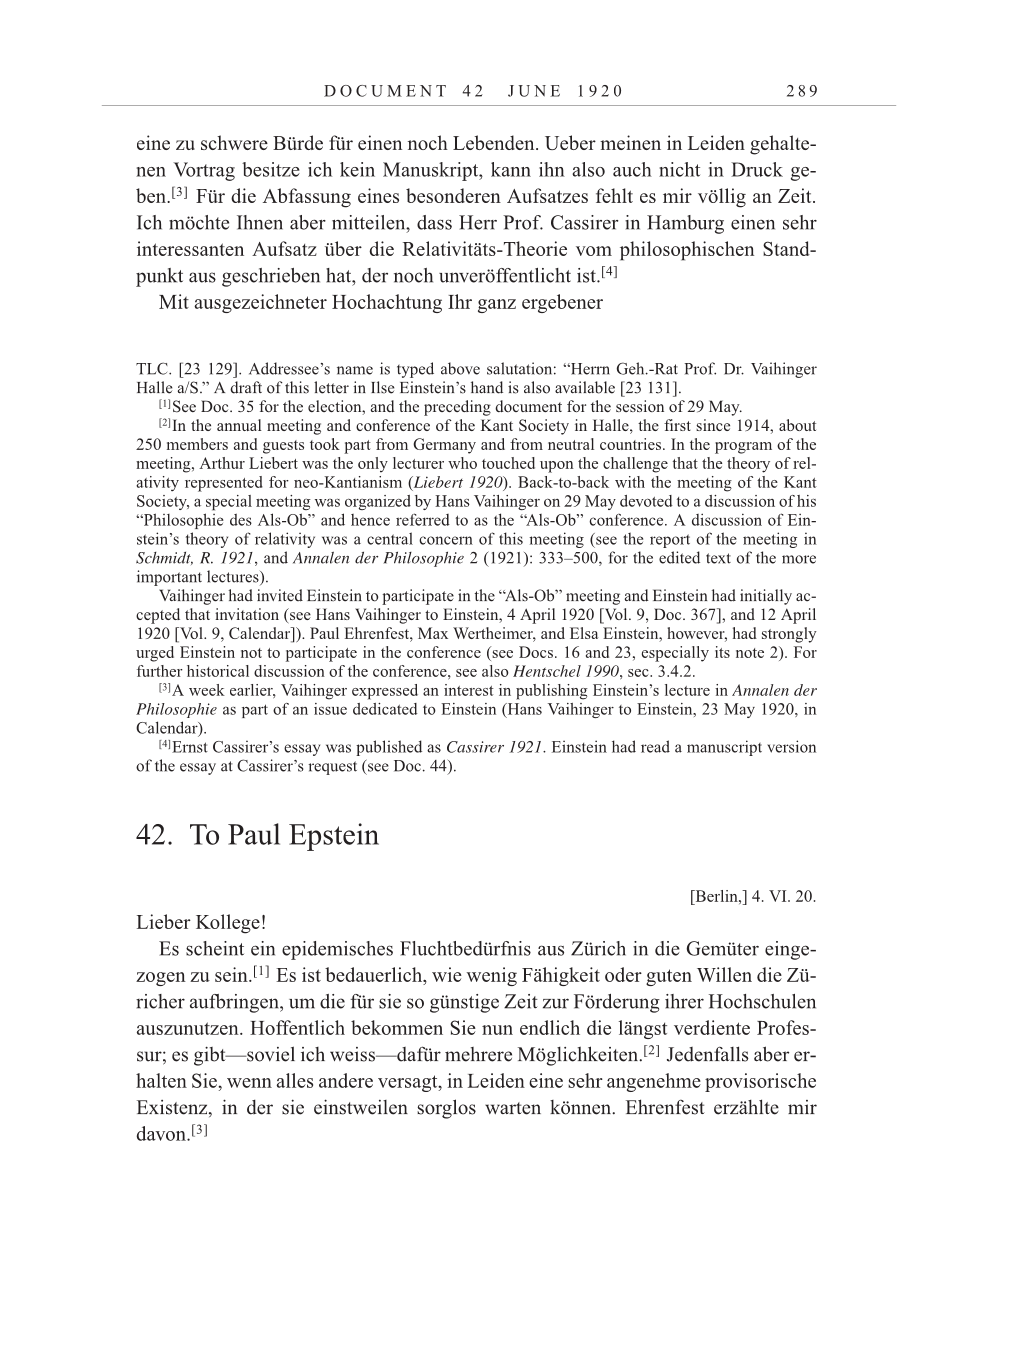 Volume 10: The Berlin Years: Correspondence May-December 1920 / Supplementary Correspondence 1909-1920 page 289